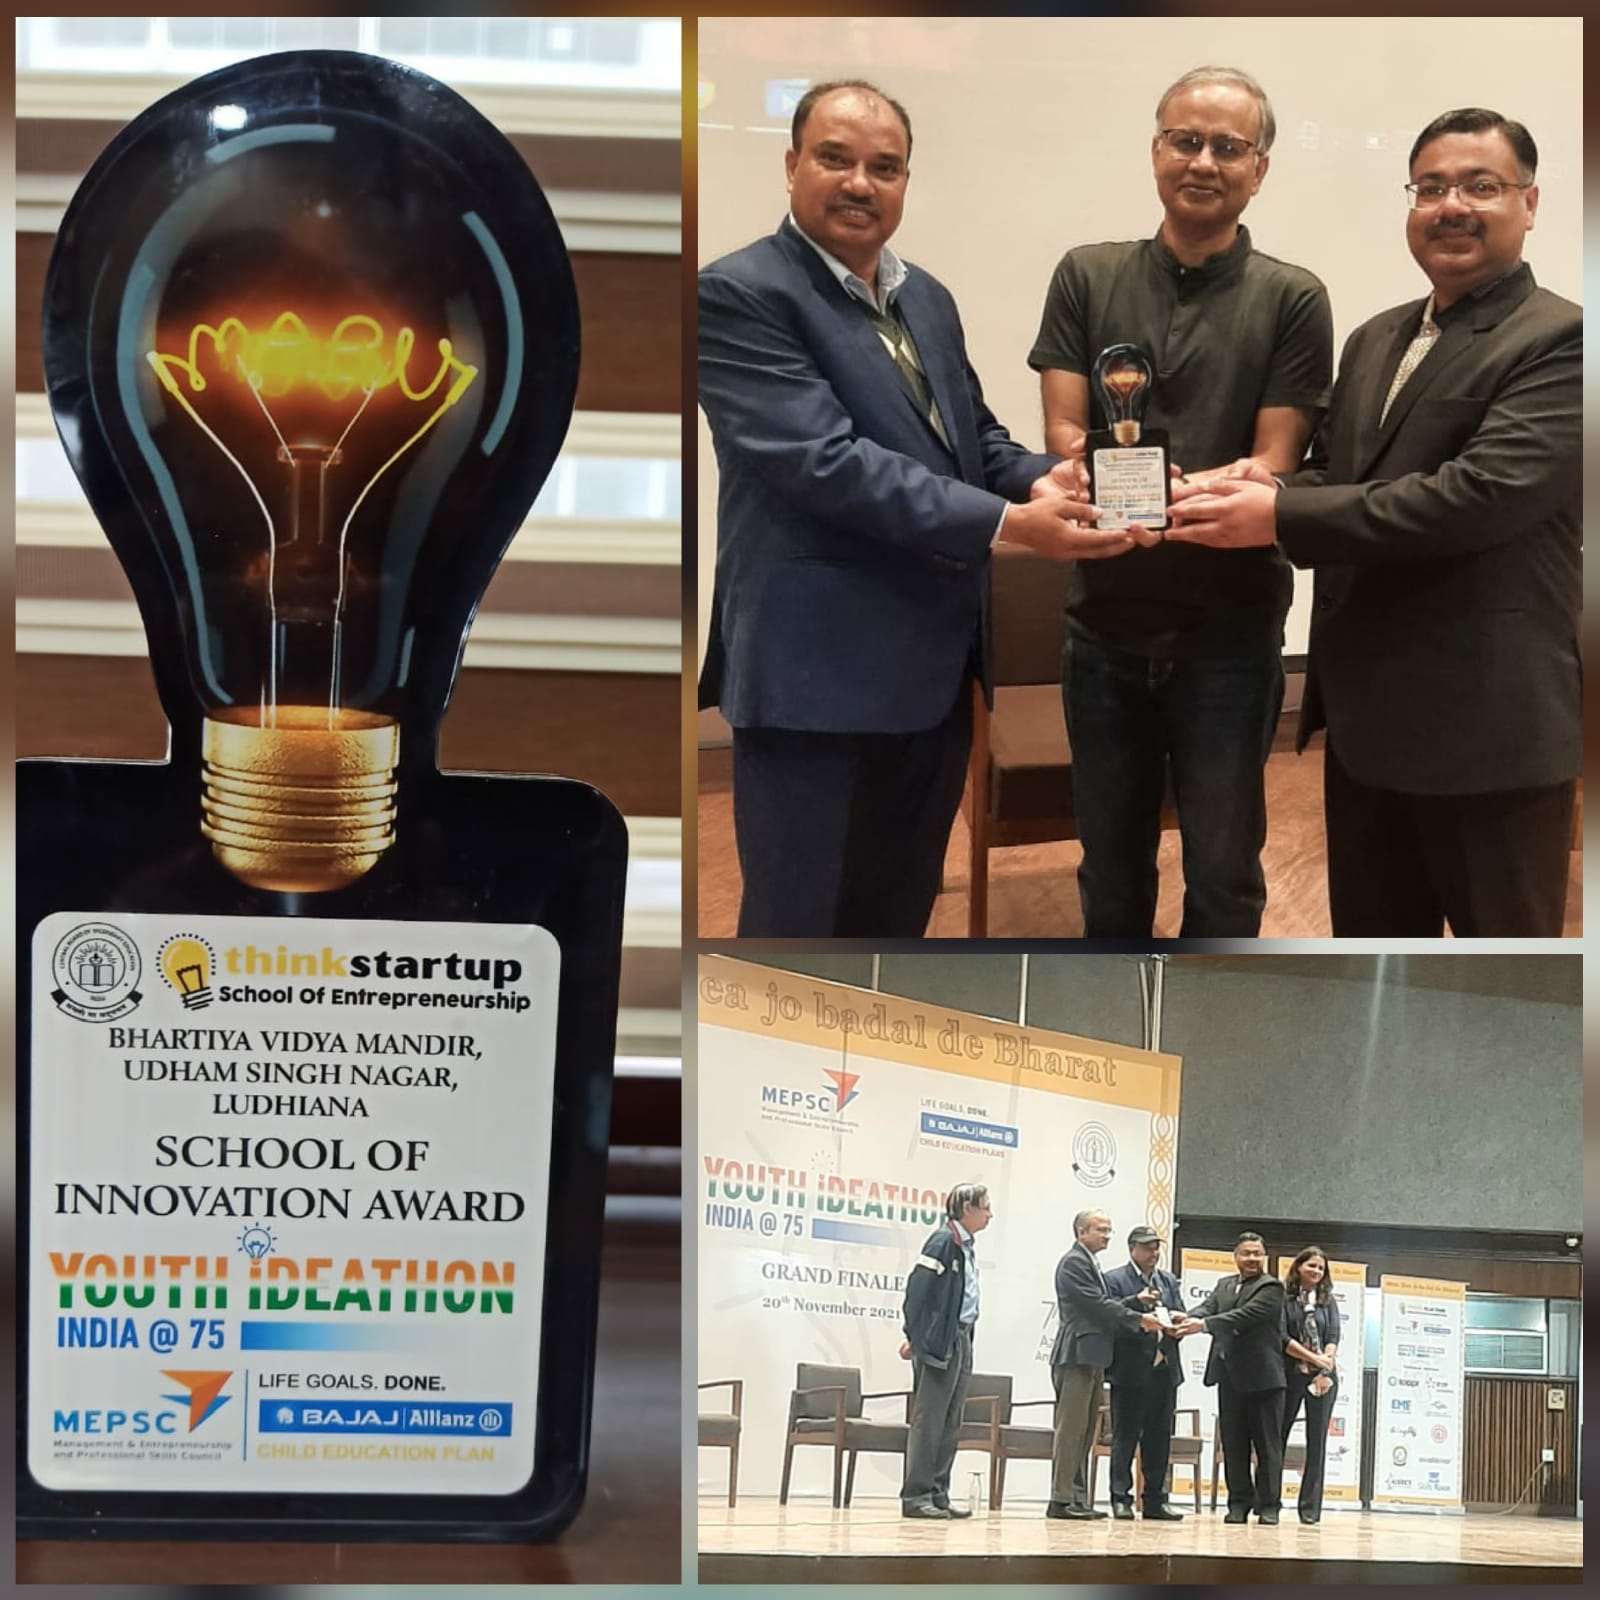 ​BVM USN shines at : Youthideathon 2021-Awarding the Innovators of tomorrow